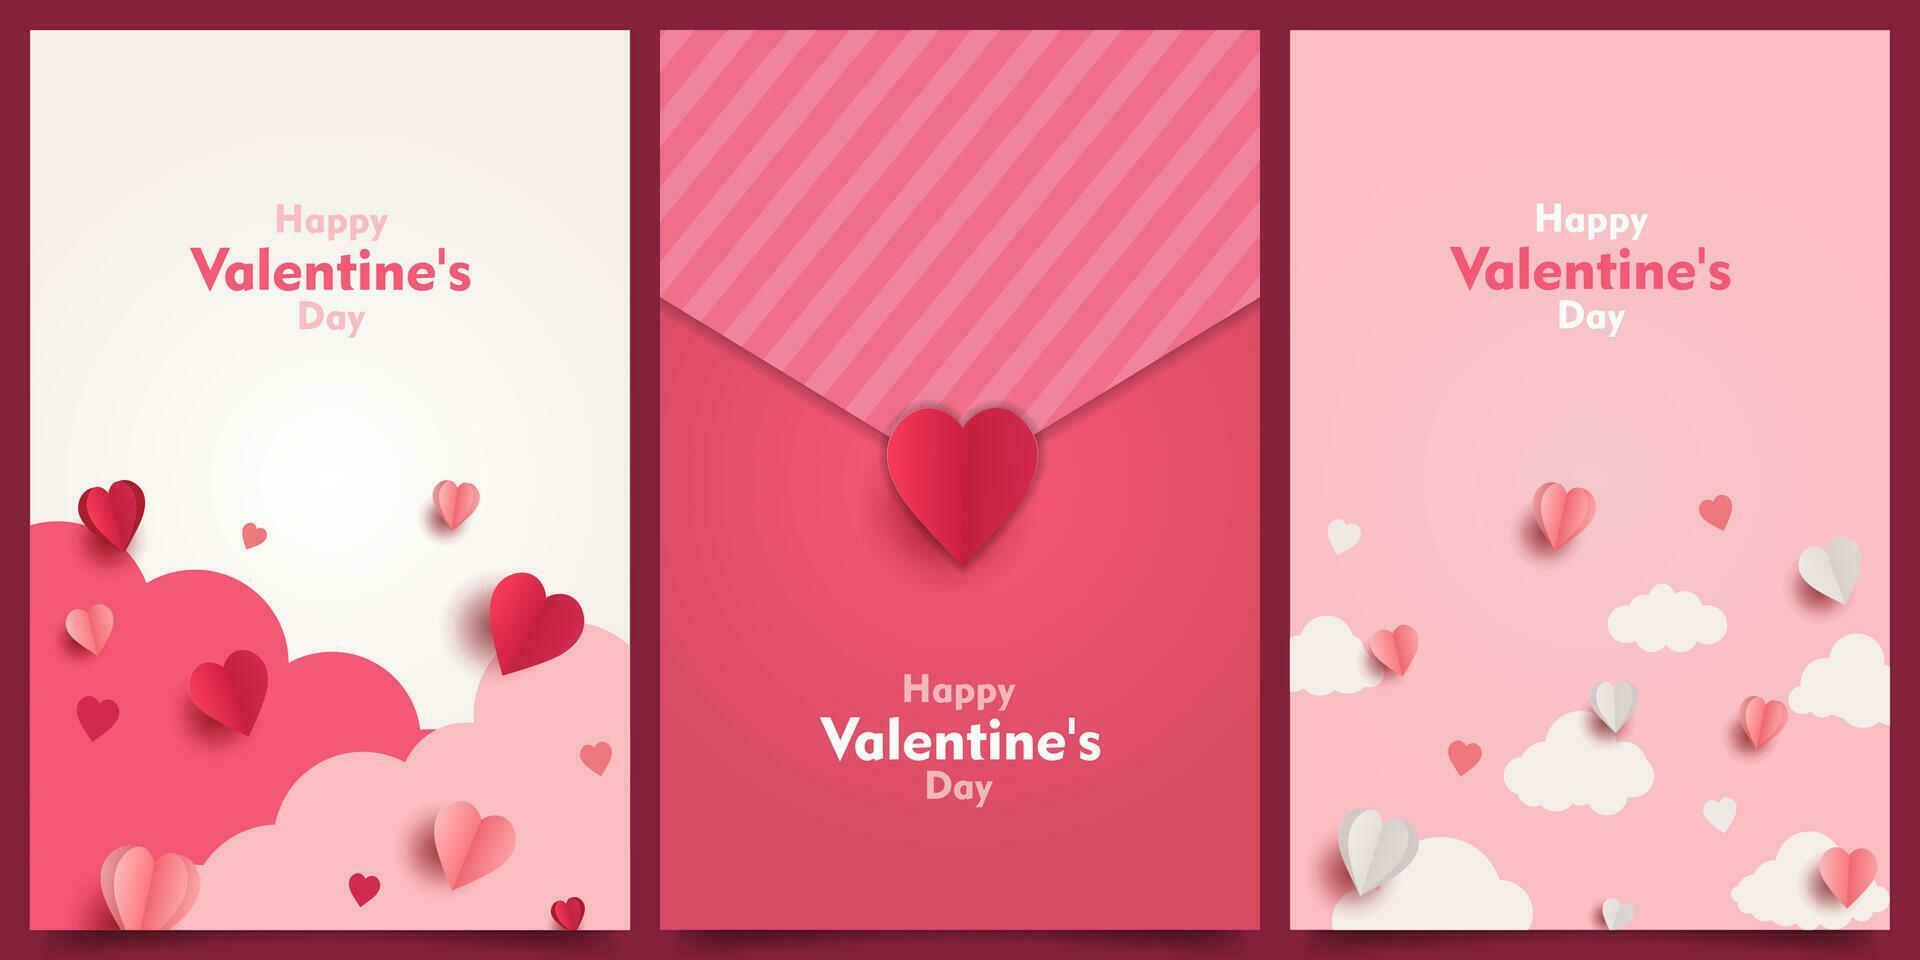 happy valentines, mothers day papercut design theme set. Holidays template background vector